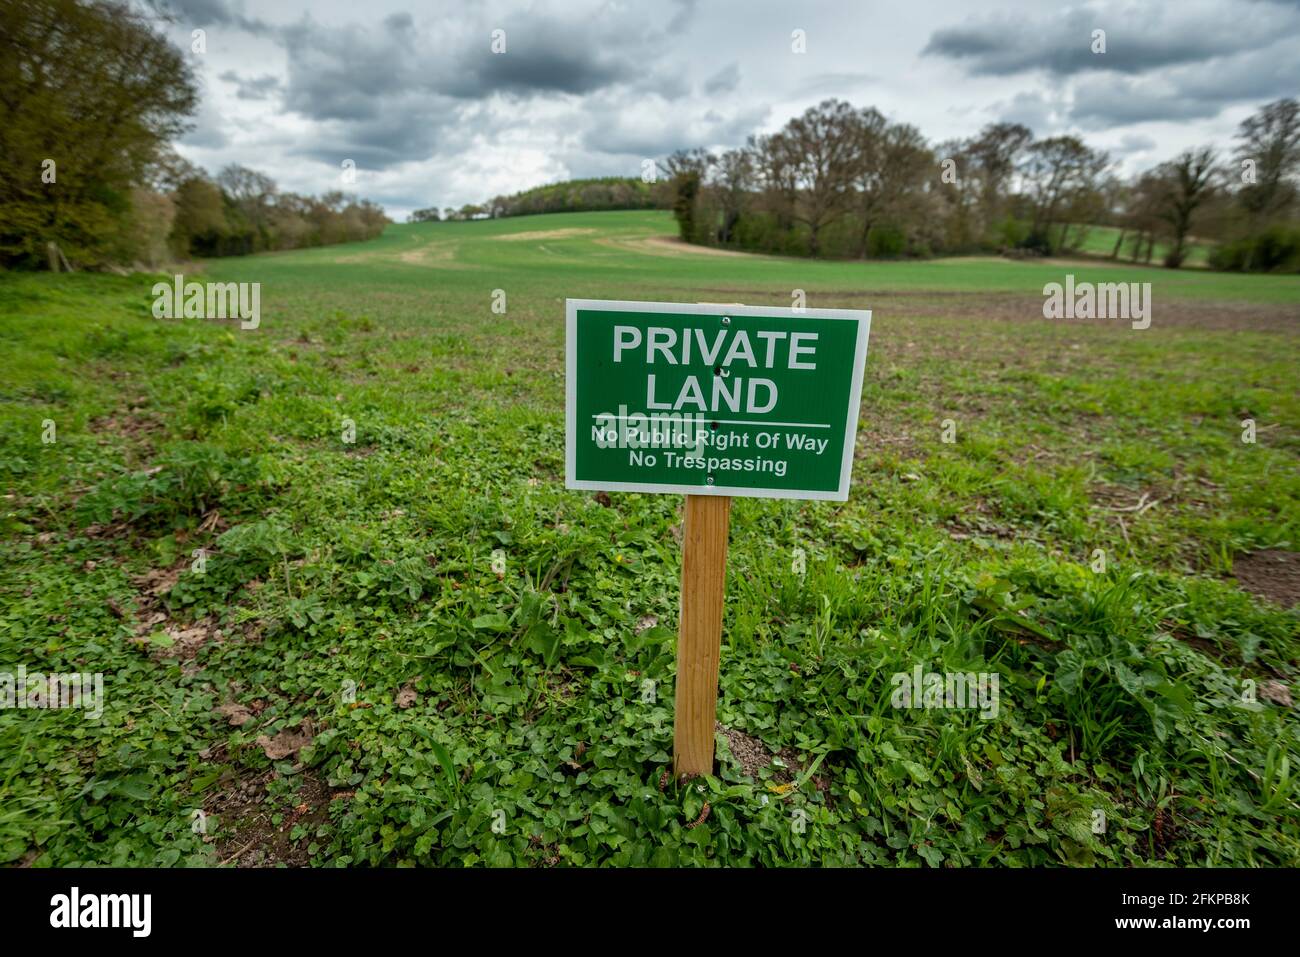 Chorleywood, UK.  3 May 2021.  A private land sign marks the boundary between a public footpath and farmland.  During the ongoing coronavirus pandemic lockdown, many people have been enjoying exploring their local area by going for walks.  The increase in footfall has prompted some landowners to offer gentle reminders to inform people where they can or cannot walk.  Credit: Stephen Chung / Alamy Live News Stock Photo